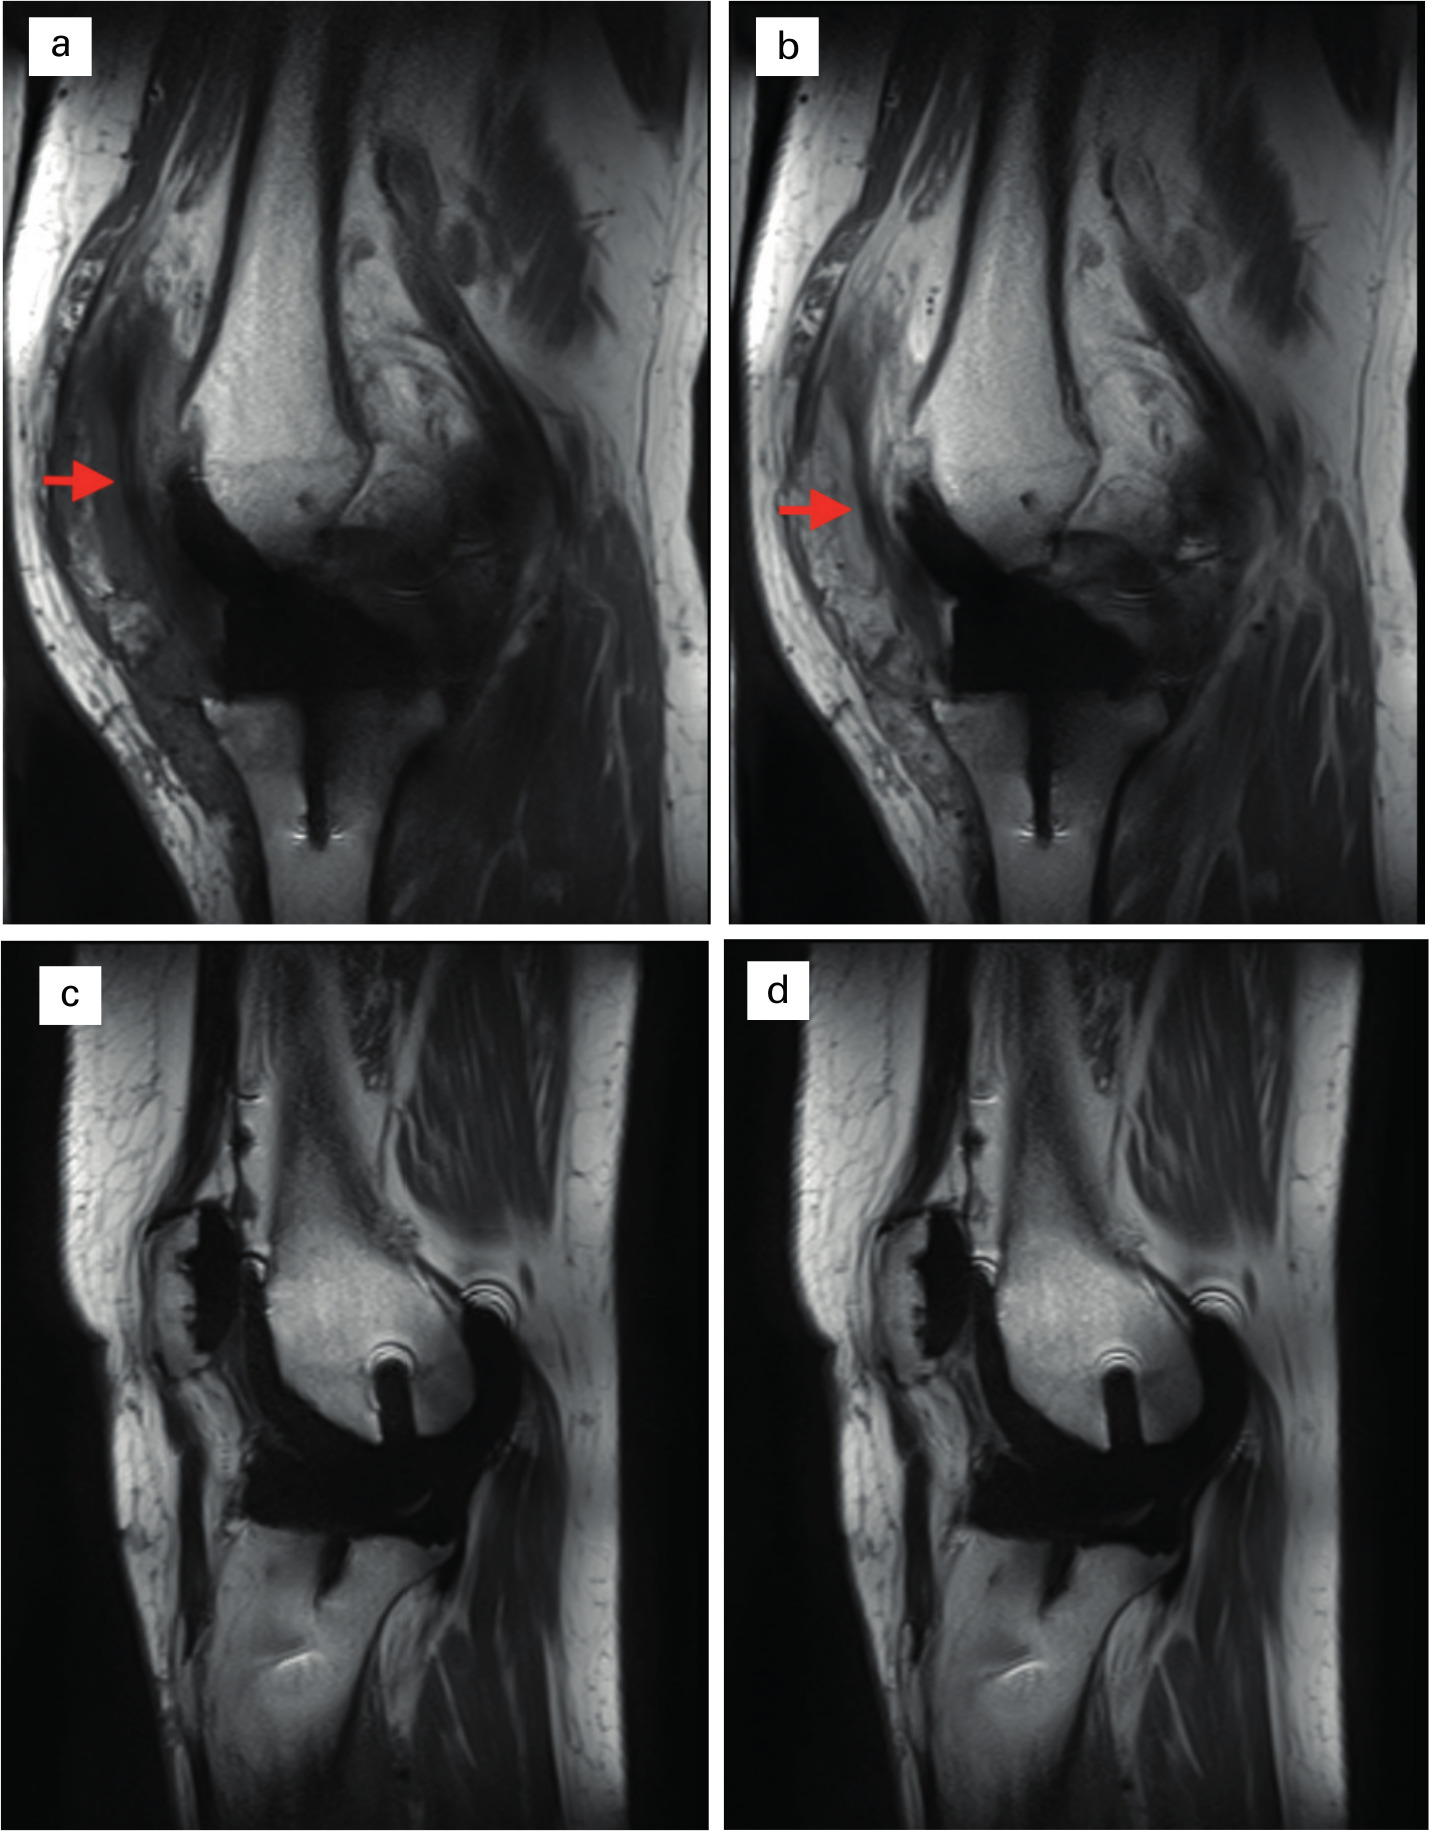 Fig. 3 
          Fibrotic tissue in the infrapatella region. Sagittal pre- and post-contrast T1 images comparing fibrotic patient (a) and (b) with non-fibrotic (c and d). Fibrotic tissue (arrows) is identified in the infrapatella region in a and b, extending underneath the patella between the infra- and suprapatella pouches. No such band of tissue is seen in a healthy TKA (c and d).
        